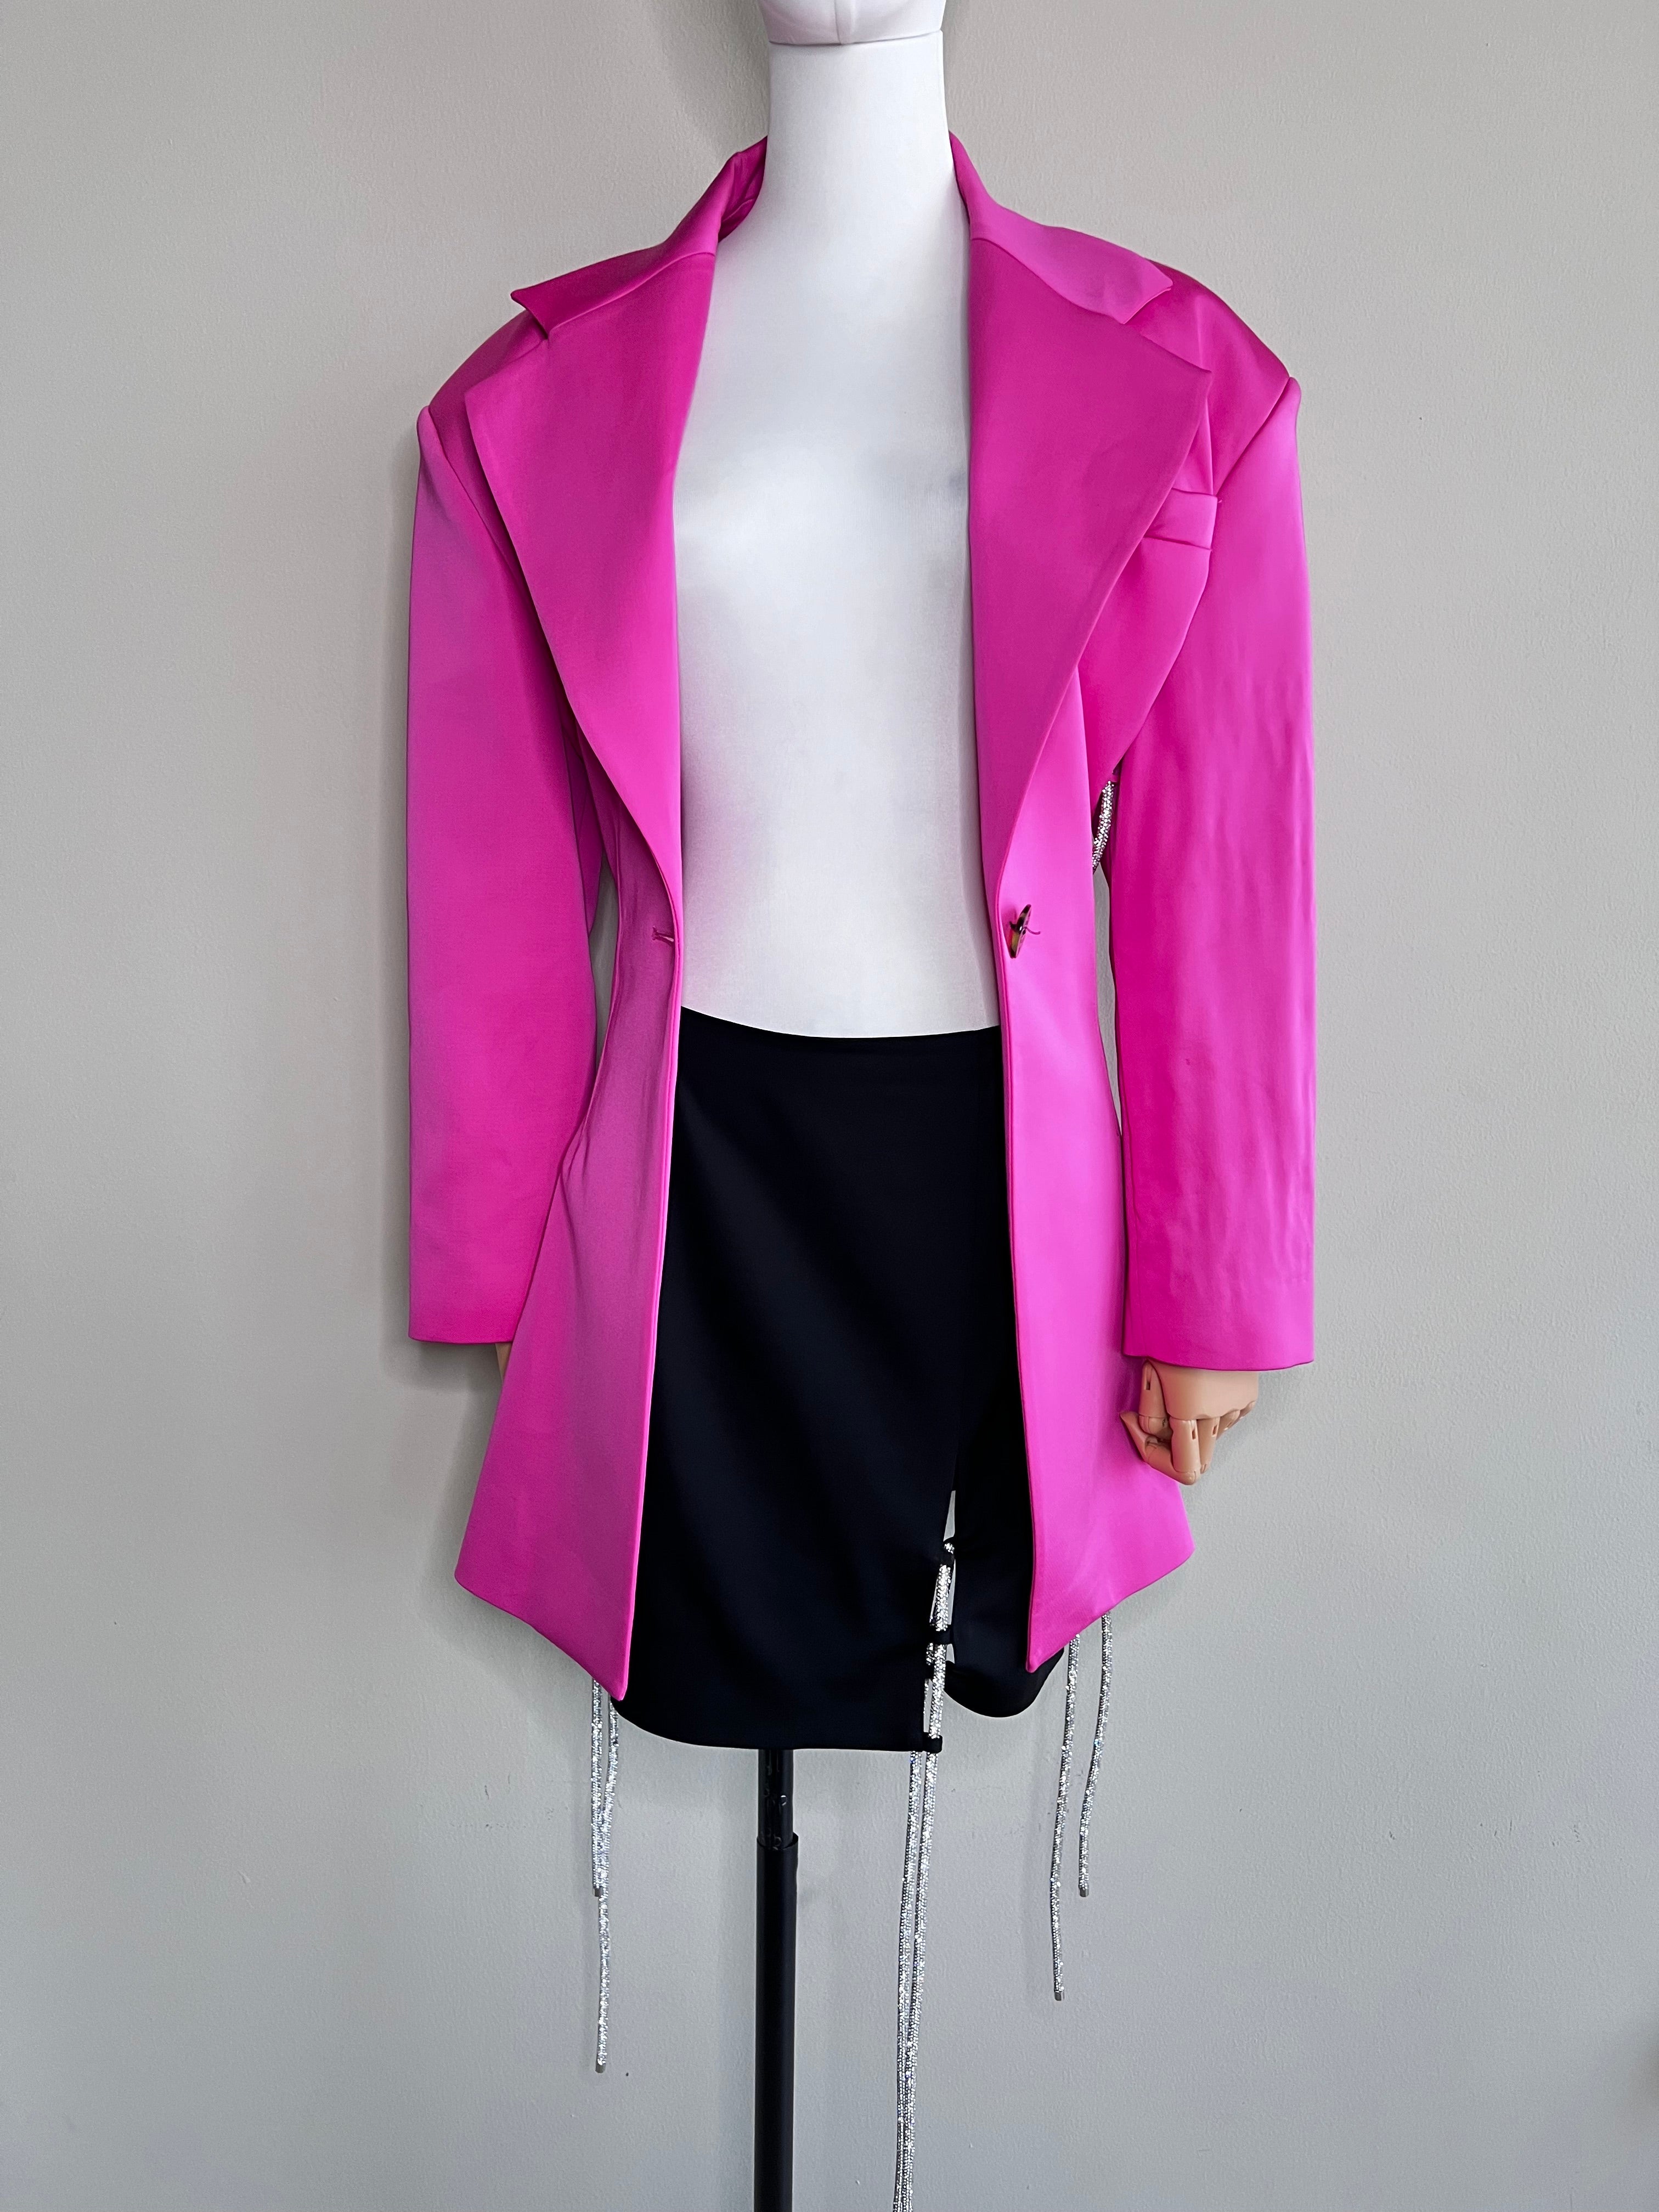 A set of Pink Blazer with Crystal embellished tie ups and Black skirt - Giuseppe Di Morabito